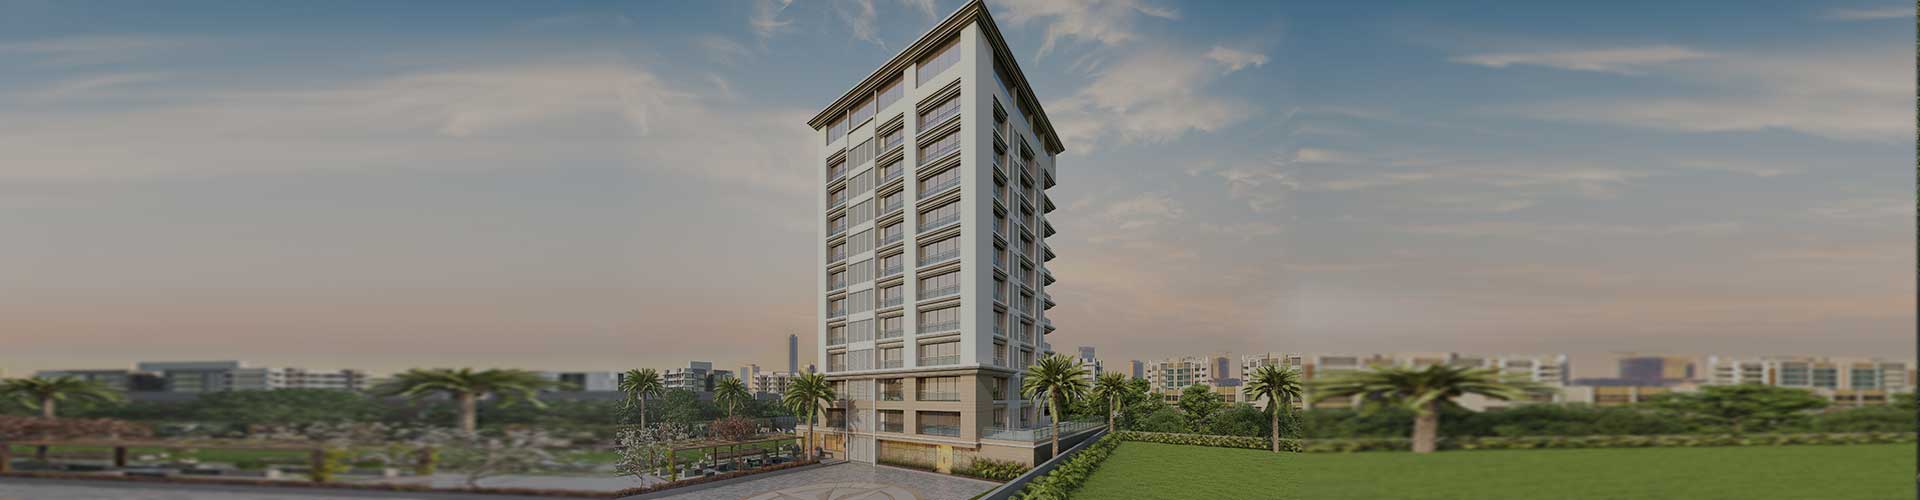 shaurya palace - new project in surat